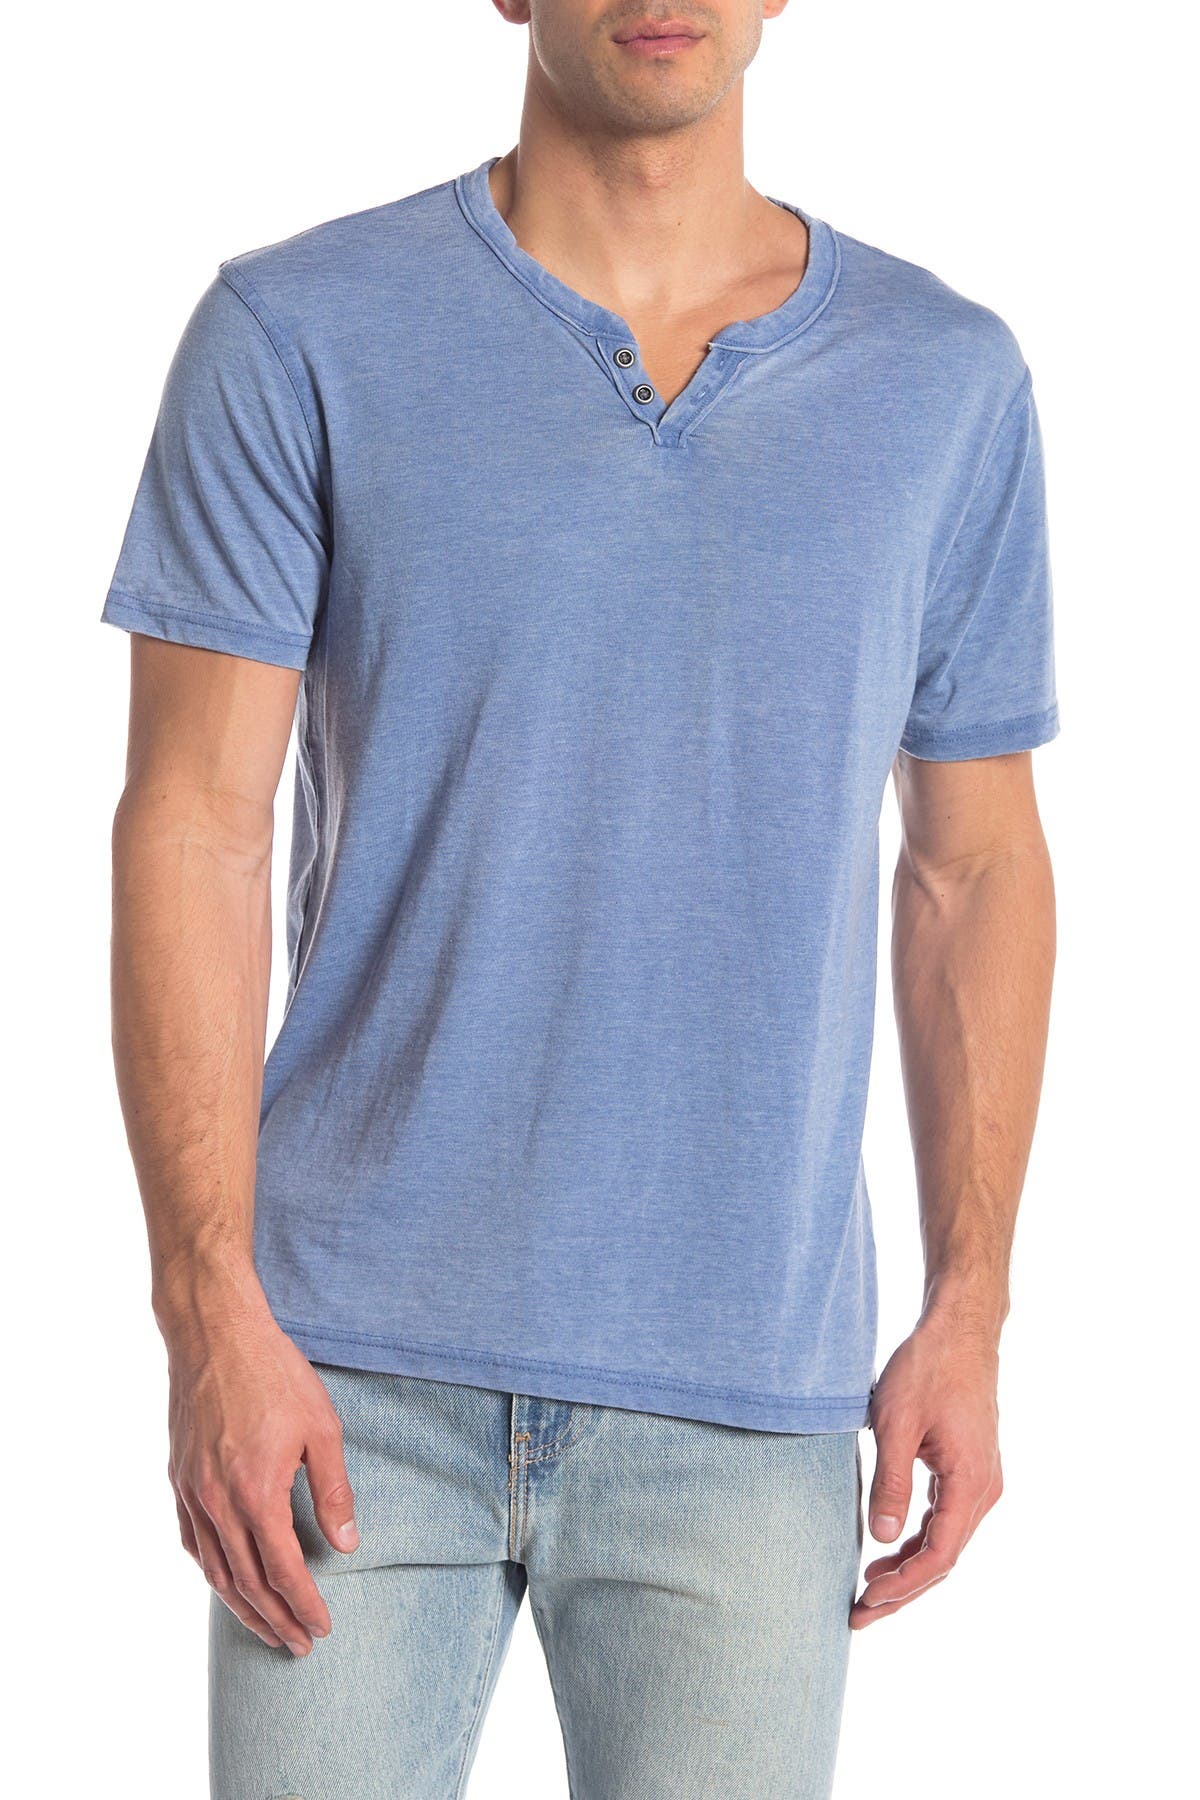 Lucky Brand Vintage Short Sleeve Henley In Bright Blue1